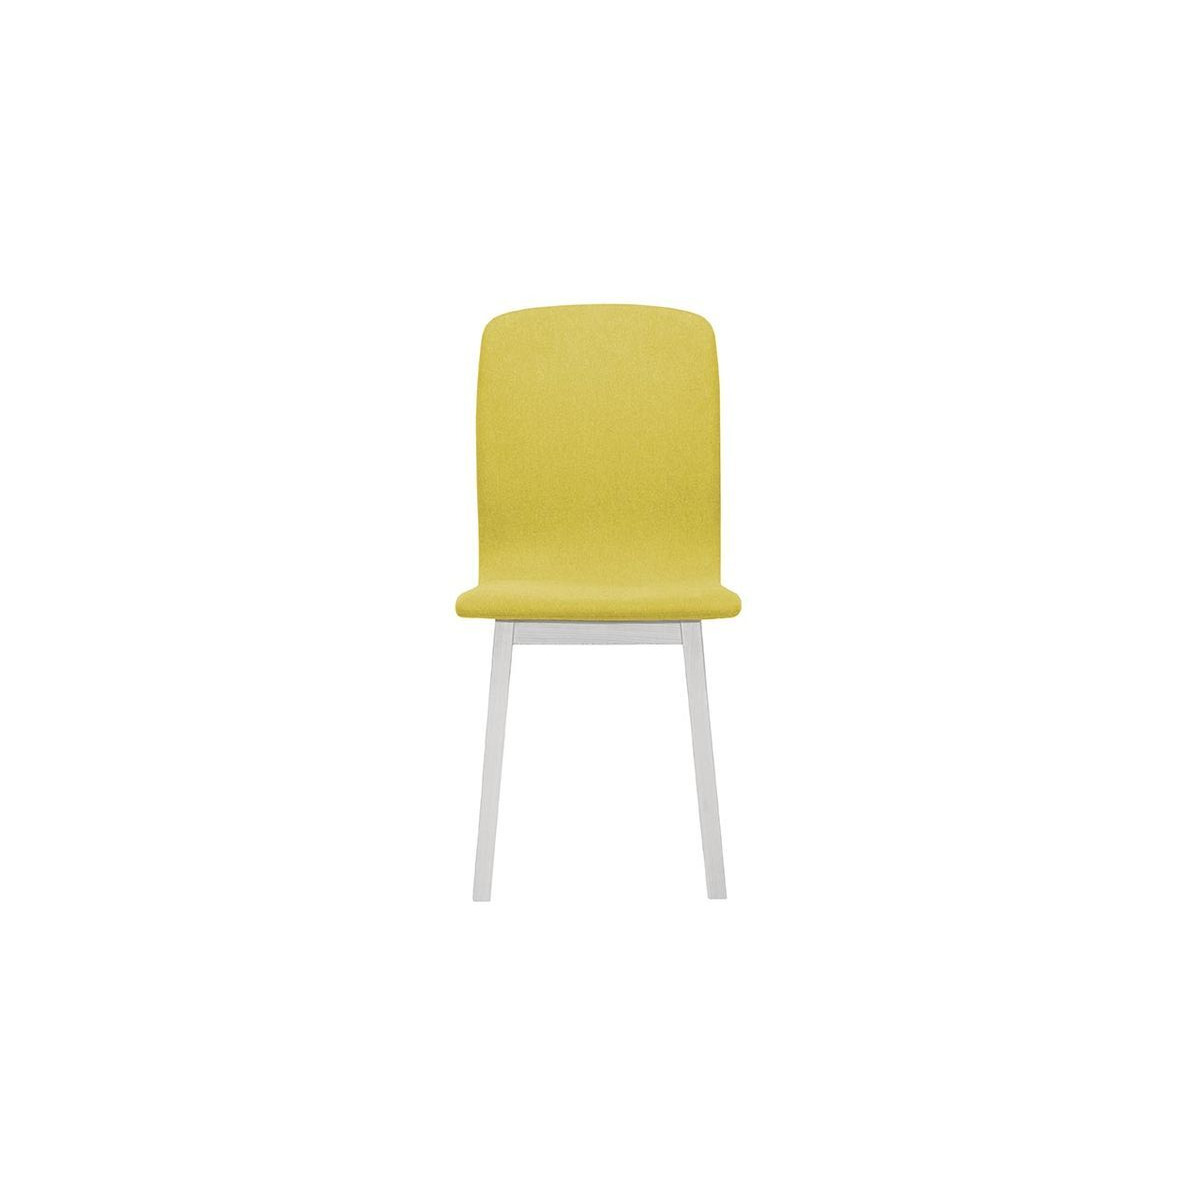 Cubo Dining Chair, yellow, Leg colour: white - image 1